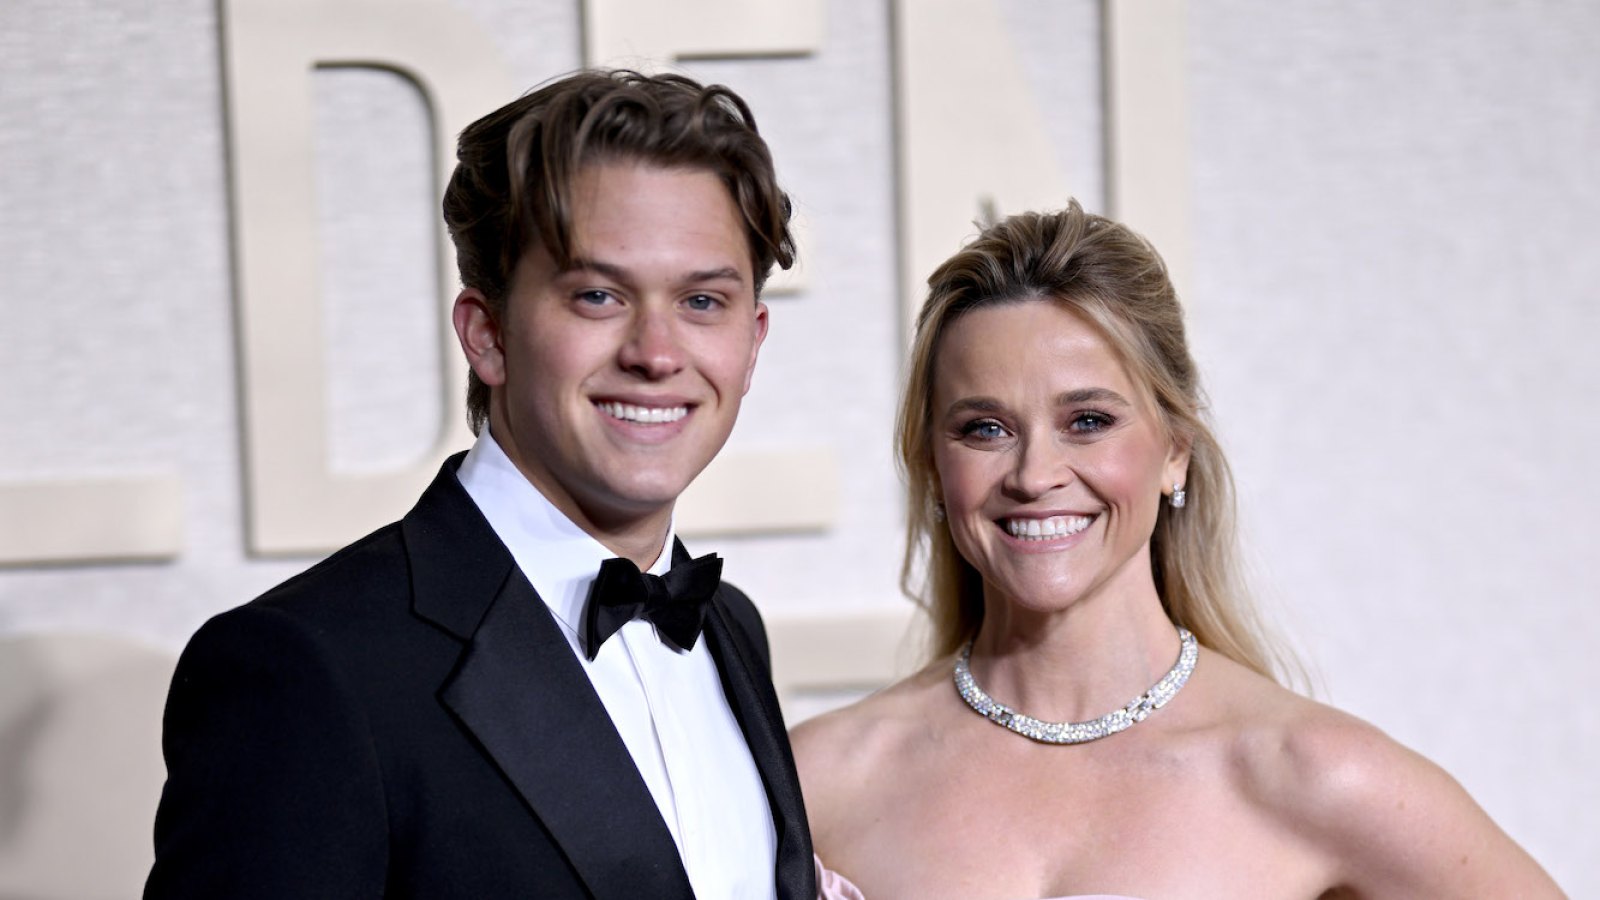 Reese Witherspoon Shares Sweet Video of Son Deacon Fixing Her Hair on Red Carpet at Golden Globes